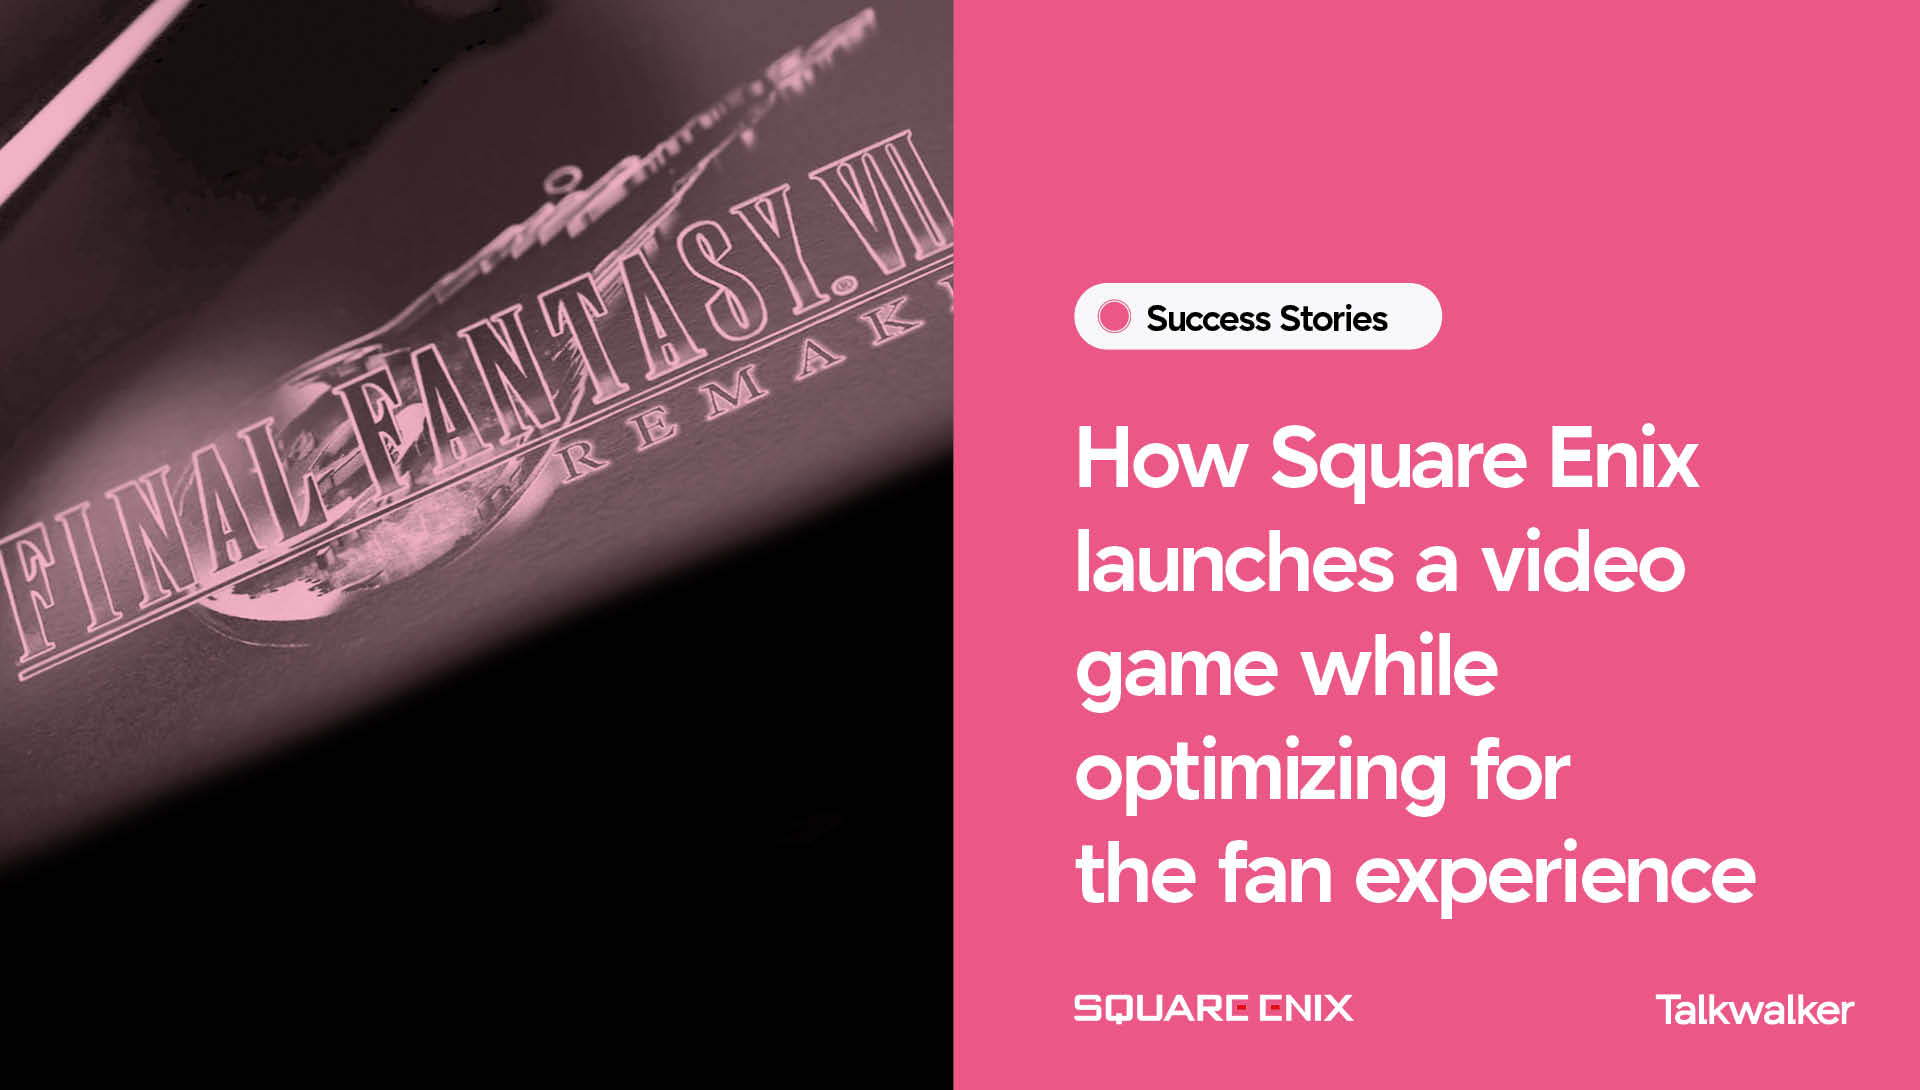 How Square Enix launches a video game while optimizing for the fan experience